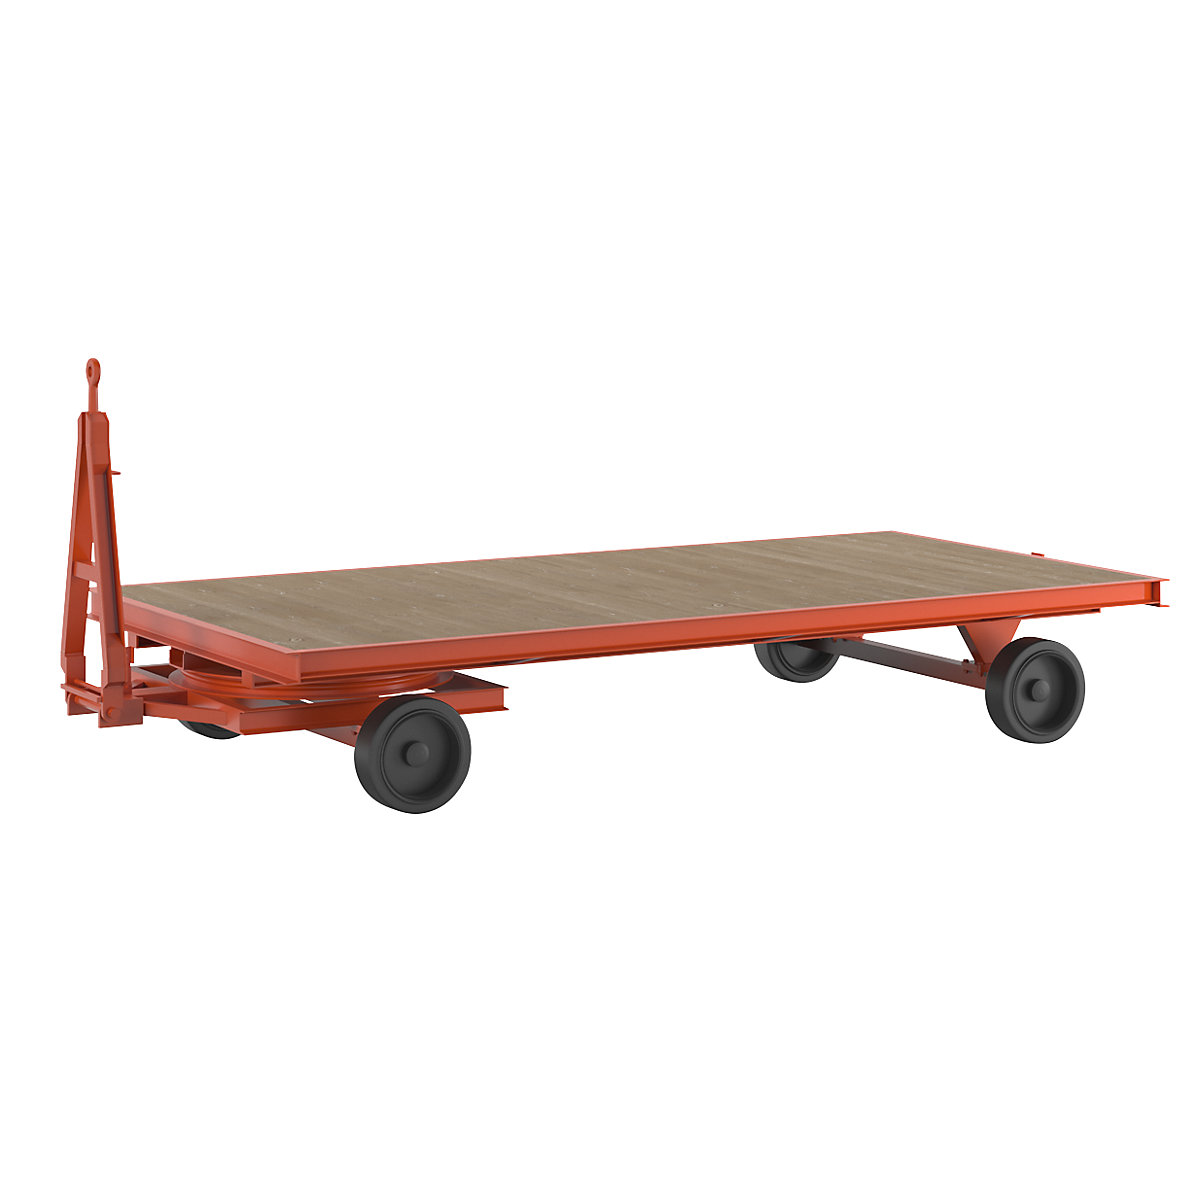 Trailer, 4-wheel double turntable steering, max. load 8 t, platform 4.0 x 2.0 m, solid rubber tyres-14